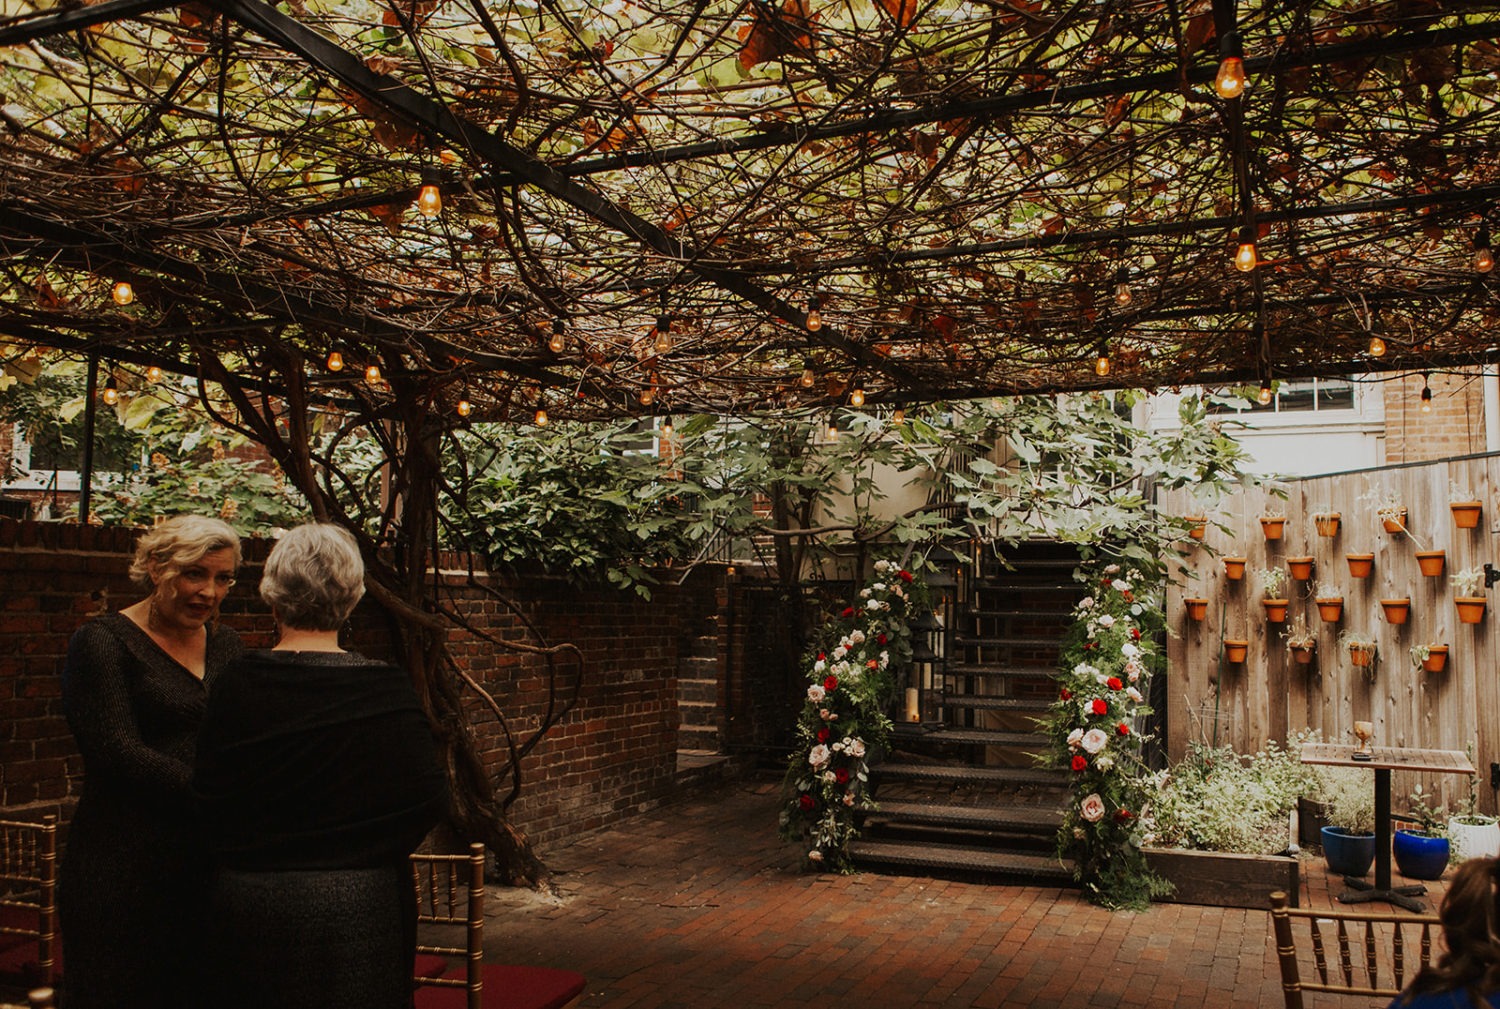 Canopy of ivy covers wedding ceremony space at Iron Gate Restaurant DC wedding